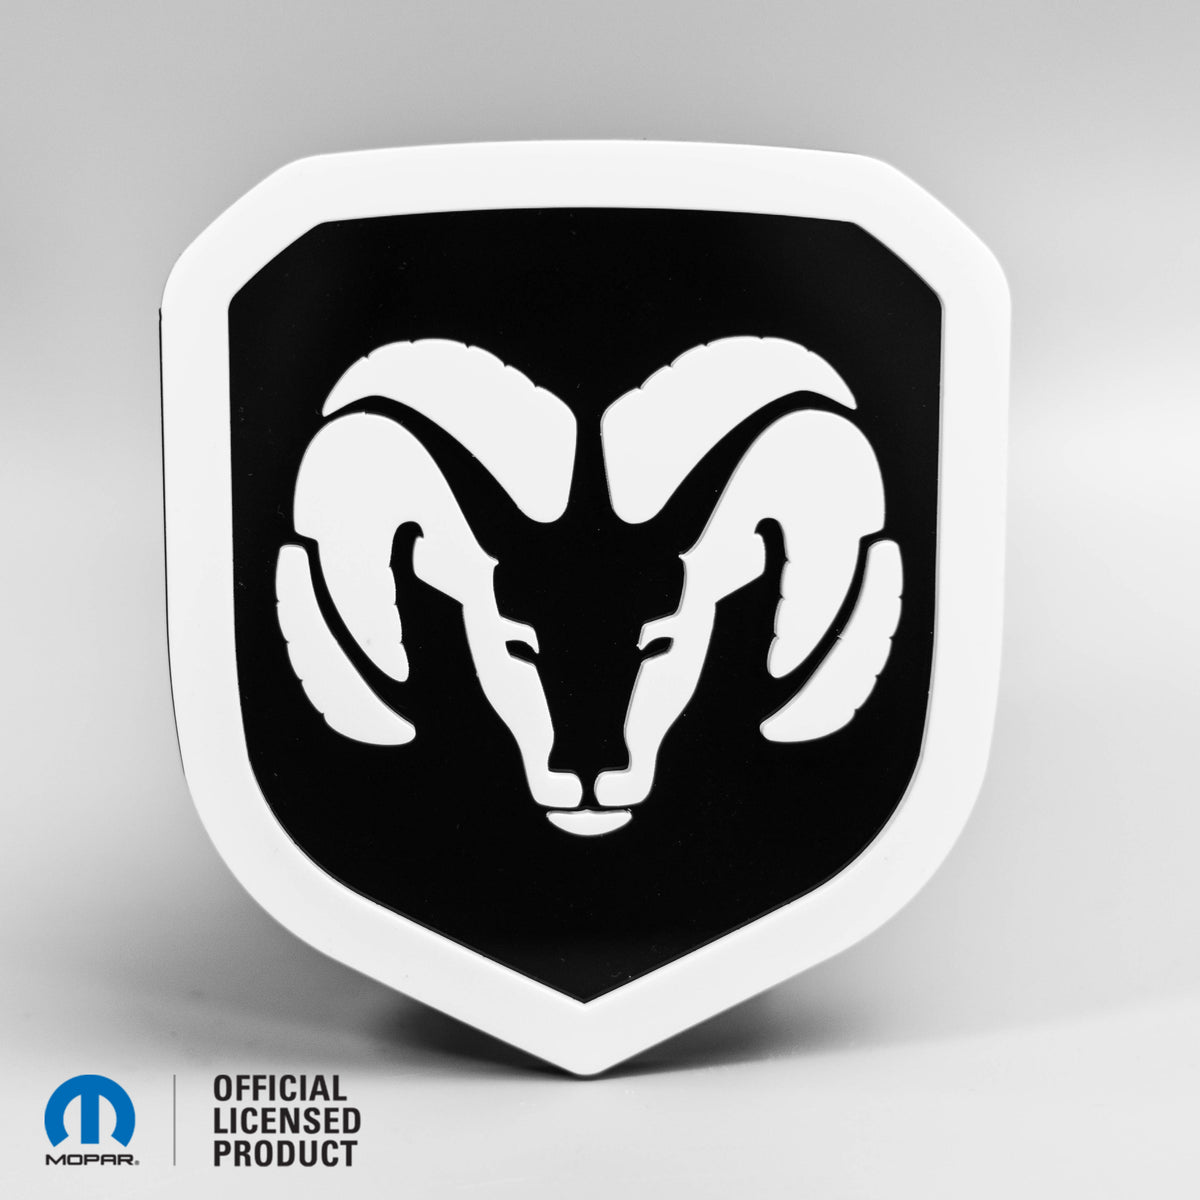 RAM® HEAD LOGO STYLE 2 GRILLE BADGE - FITS 2013-2018 DODGE® RAM® GRILLE - 1500, 2500, 3500 - White on Gloss - Officially Licensed Product